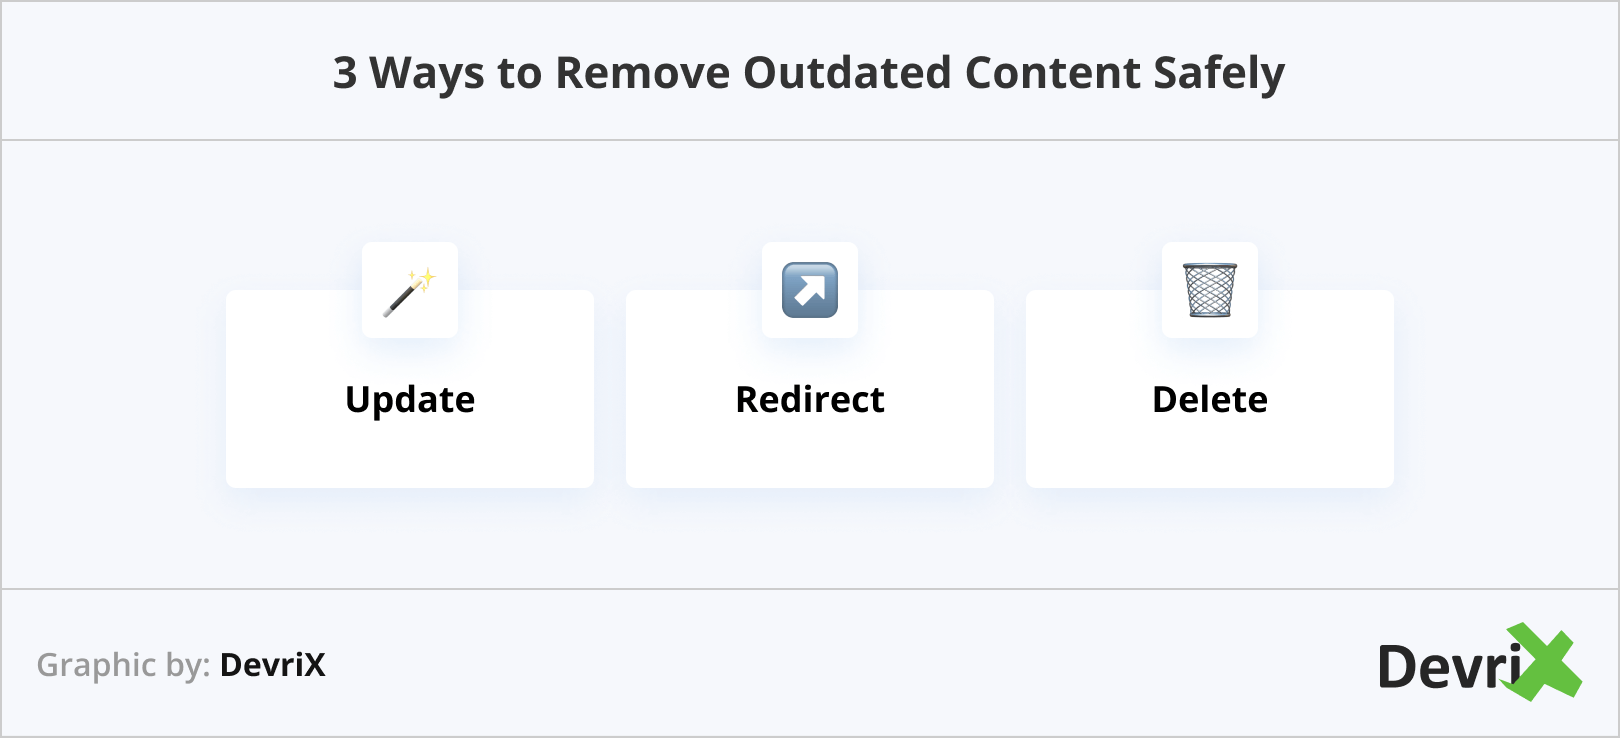 3 Ways to Remove Outdated Content Safely